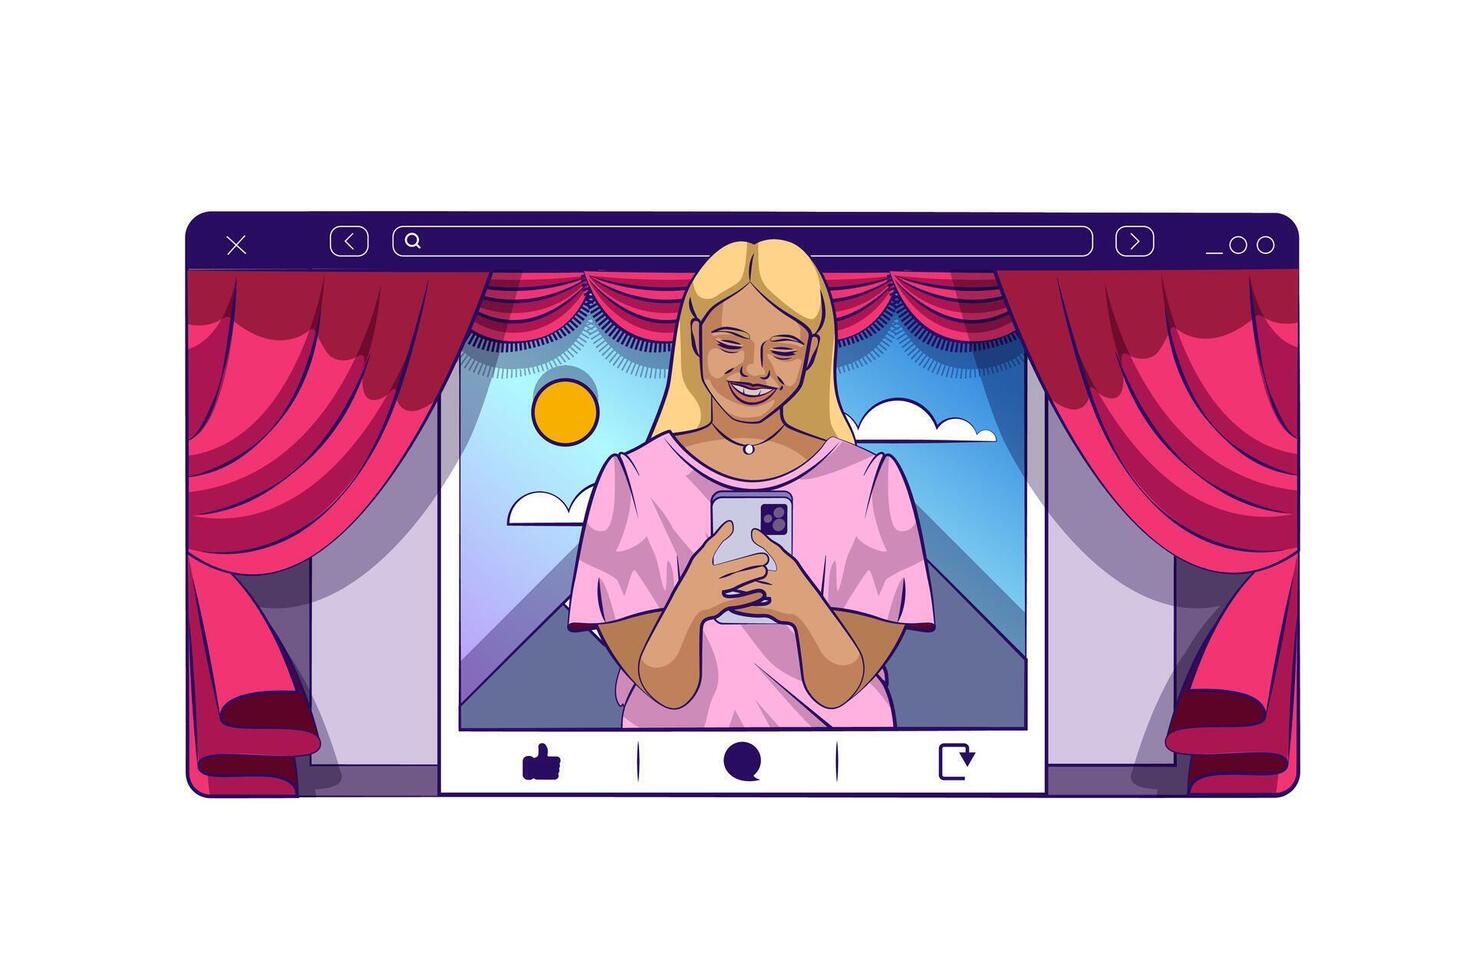 Social media concept with people scene in flat cartoon design for web. Woman posts photo, browsing friend news, blogging and influence. Vector illustration for social media banner, marketing material.